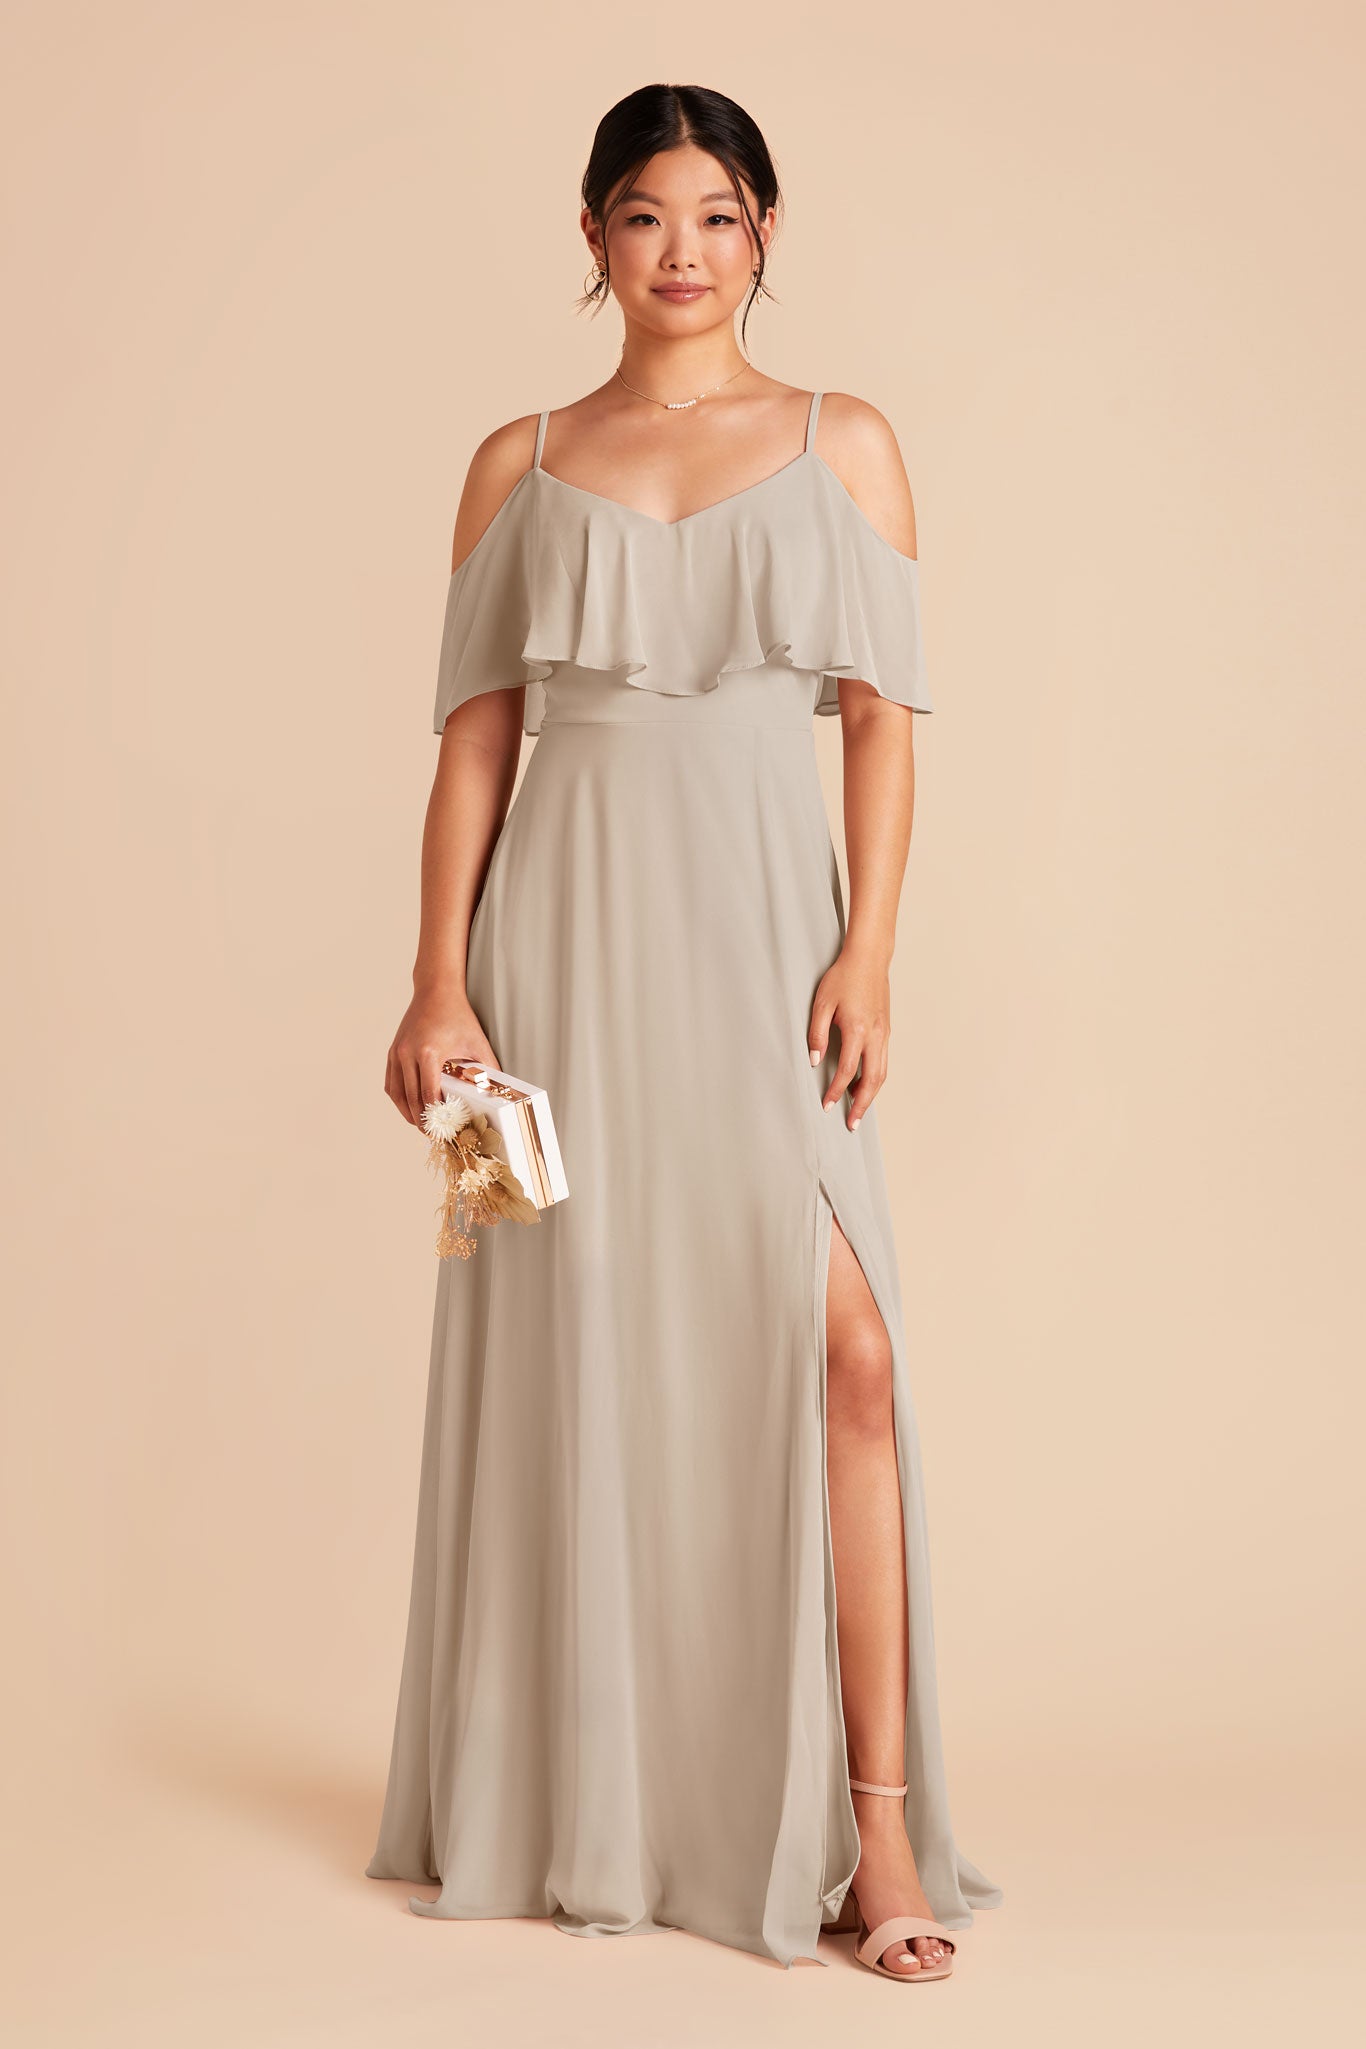 Neutral Champagne Jane Convertible Dress by Birdy Grey